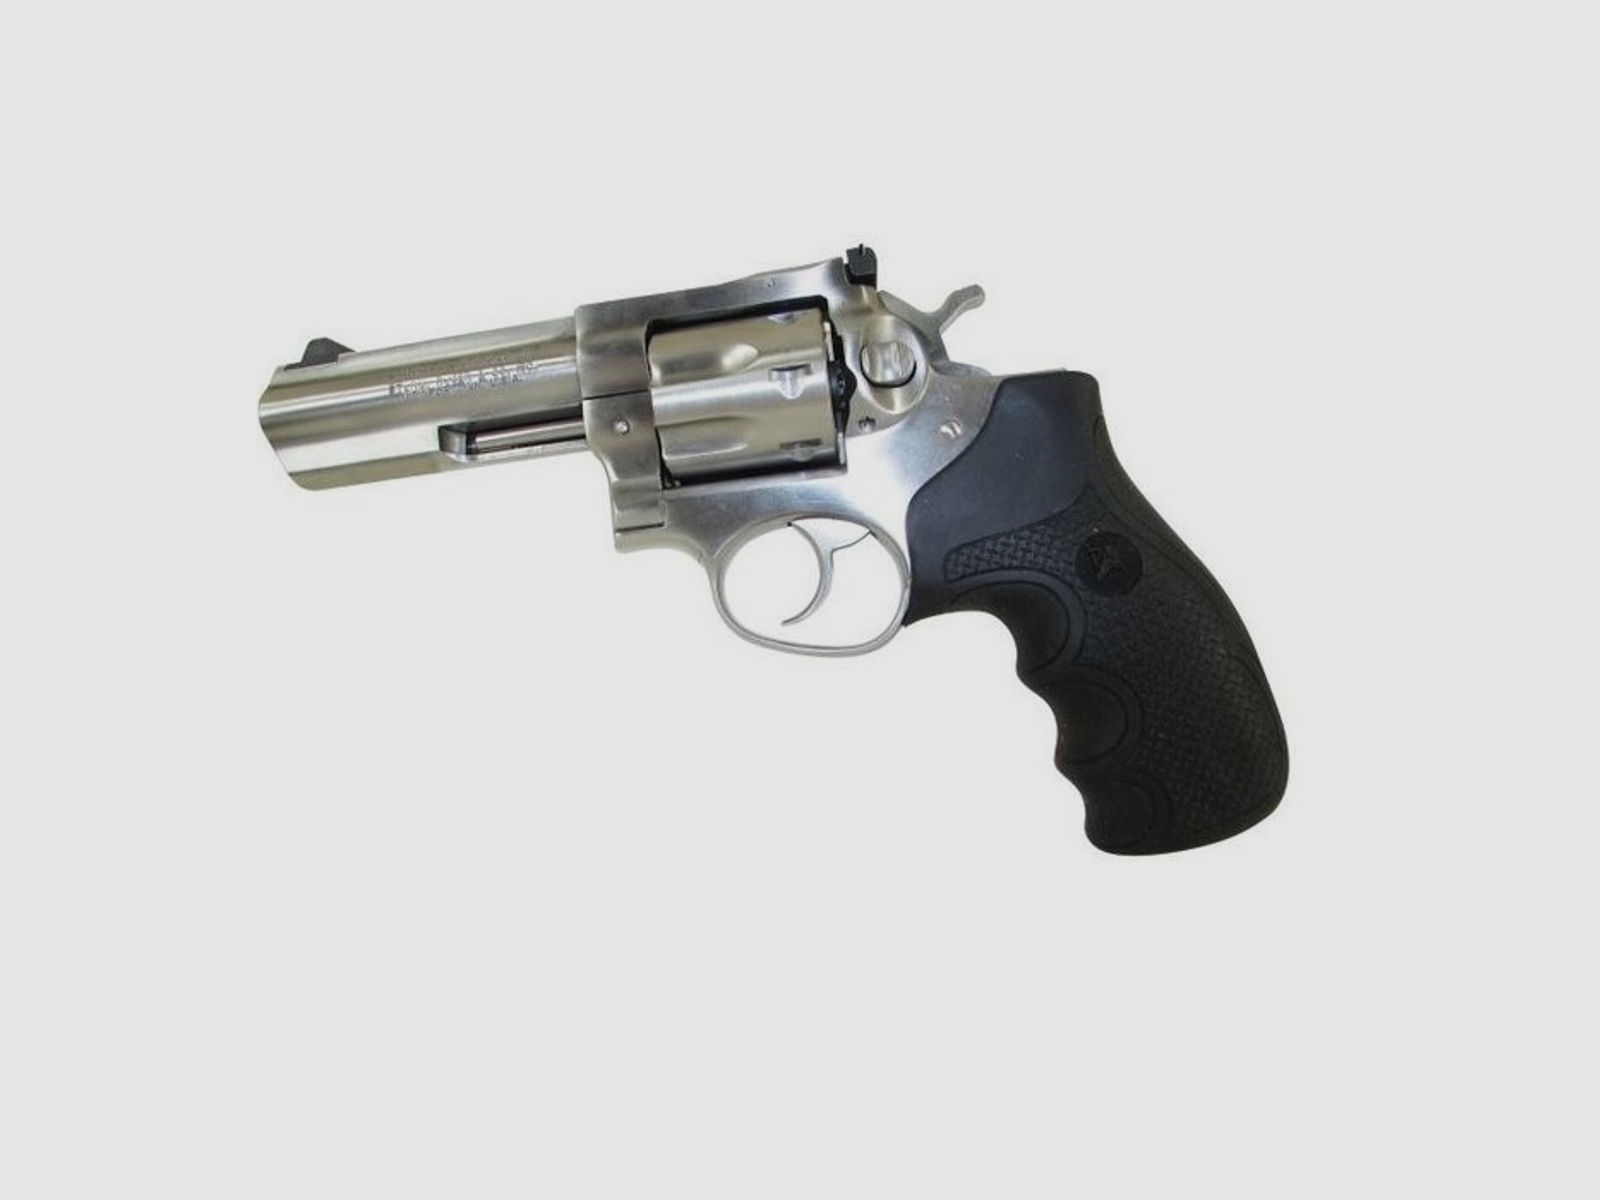 Pachmayr Griff Diamond Pro Ruger GP100